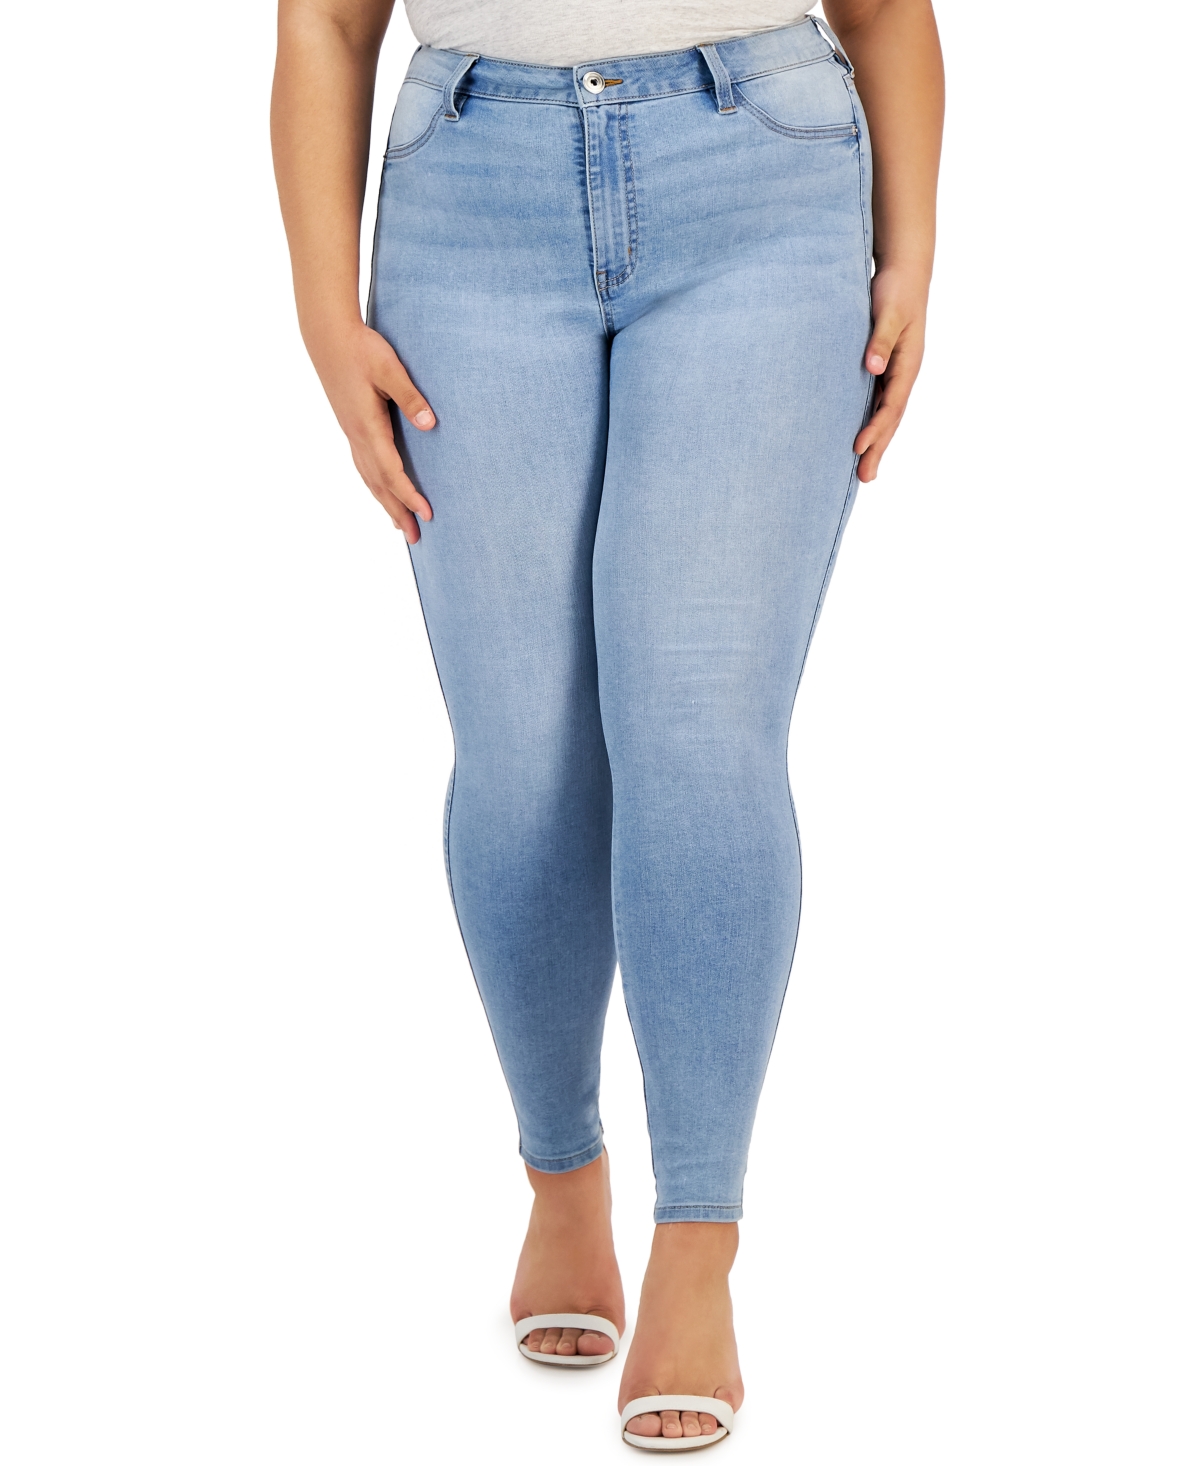 CELEBRITY PINK TRENDY PLUS SIZE HIGH RISE SKINNY ANKLE JEANS